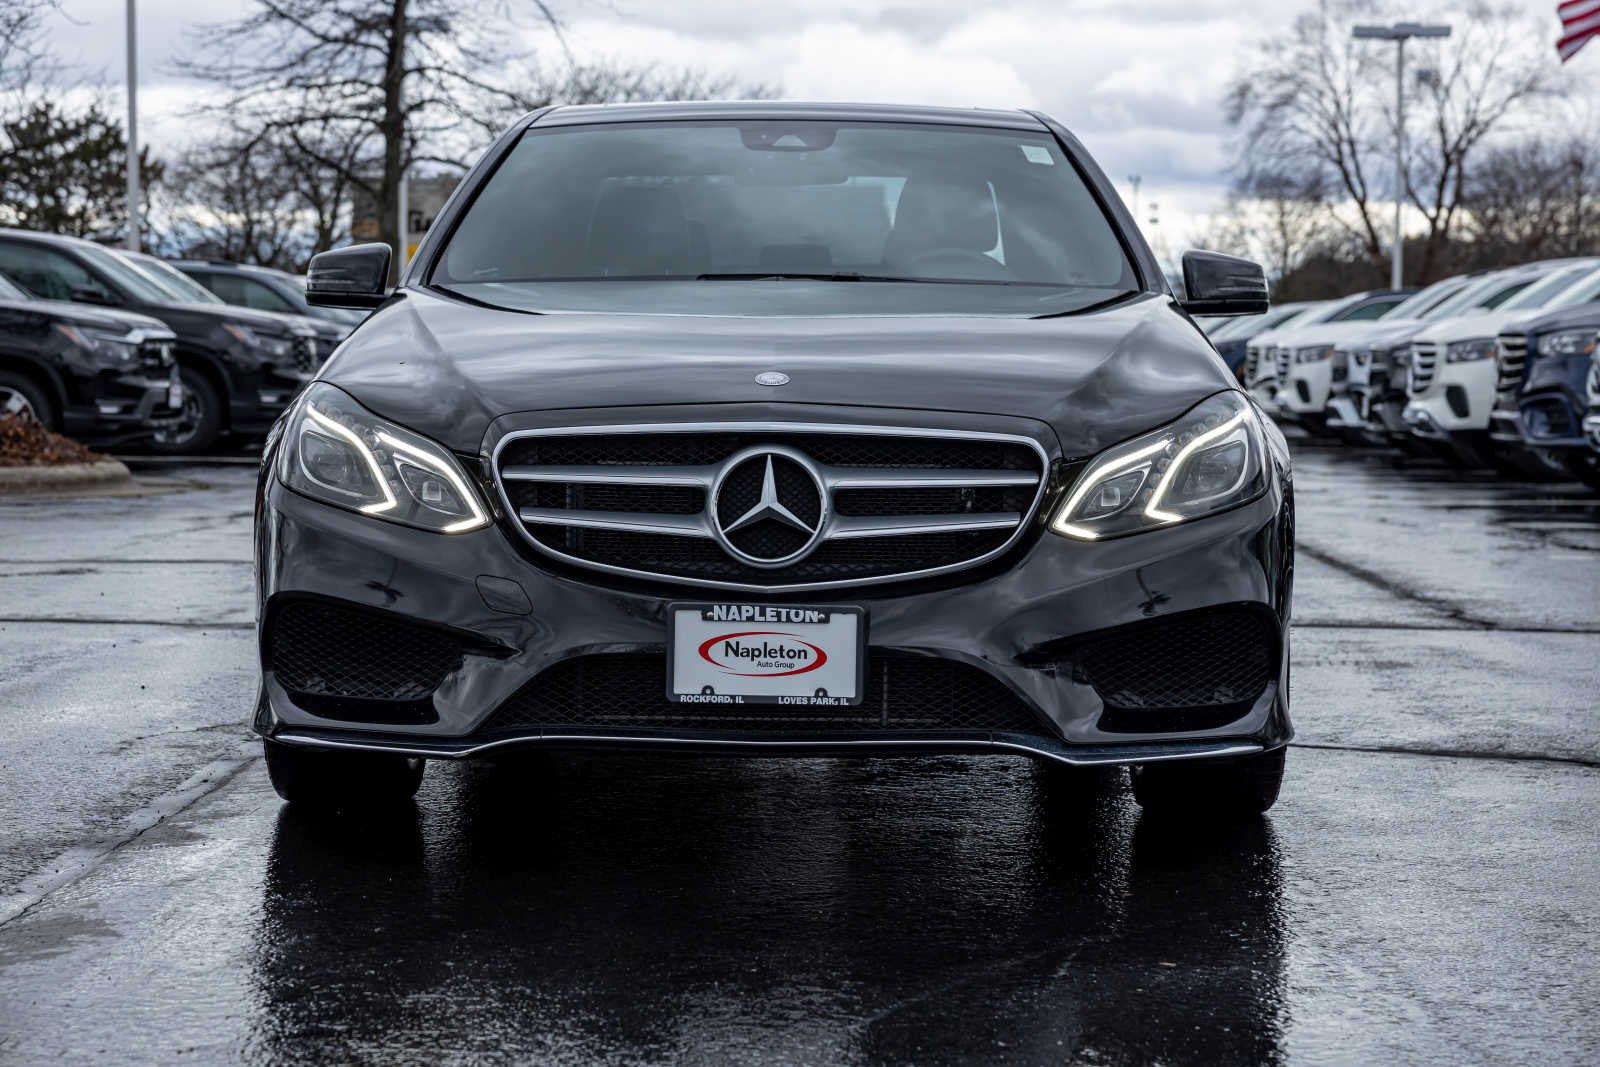 Used 2015 Mercedes-Benz E-Class E350 Sport with VIN WDDHF8JB8FB110510 for sale in Loves Park, IL